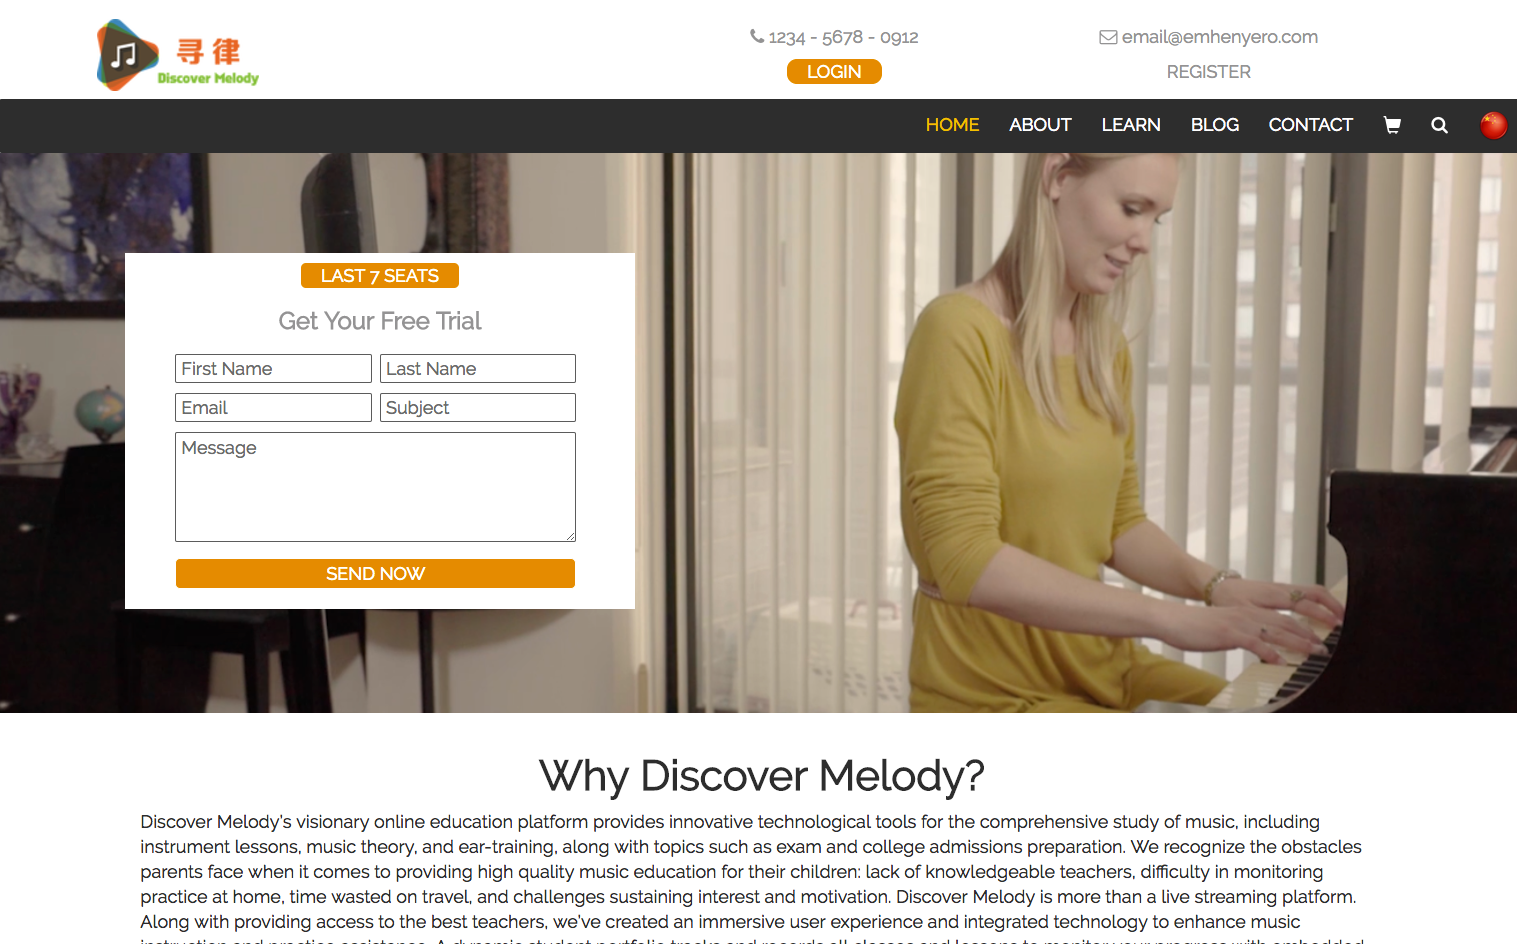 Discover Melody